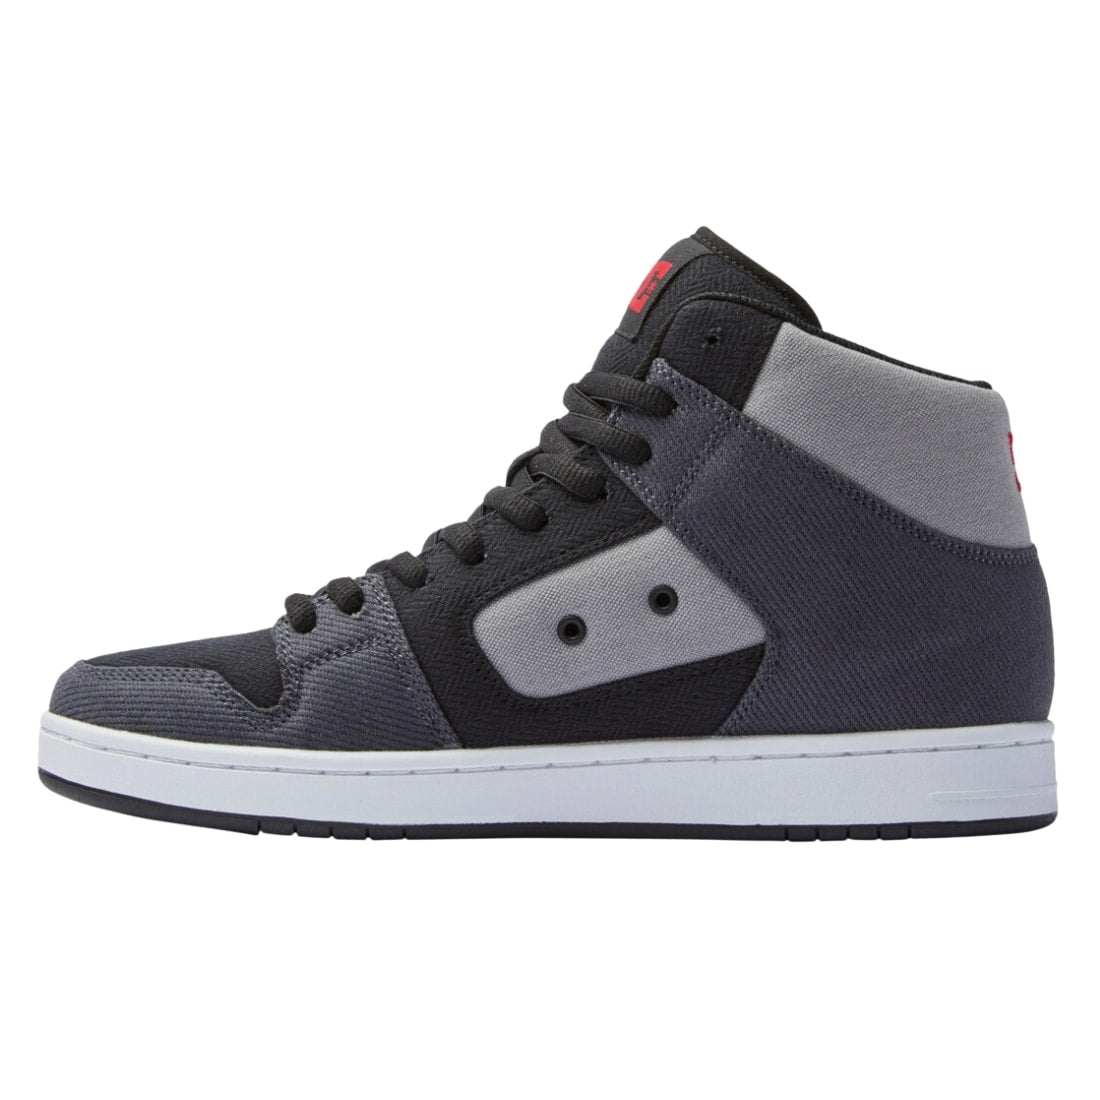 Dc Manteca 4 High Top Zero Waste Shoes - Black Red Grey - Mens High Top Trainers by DC